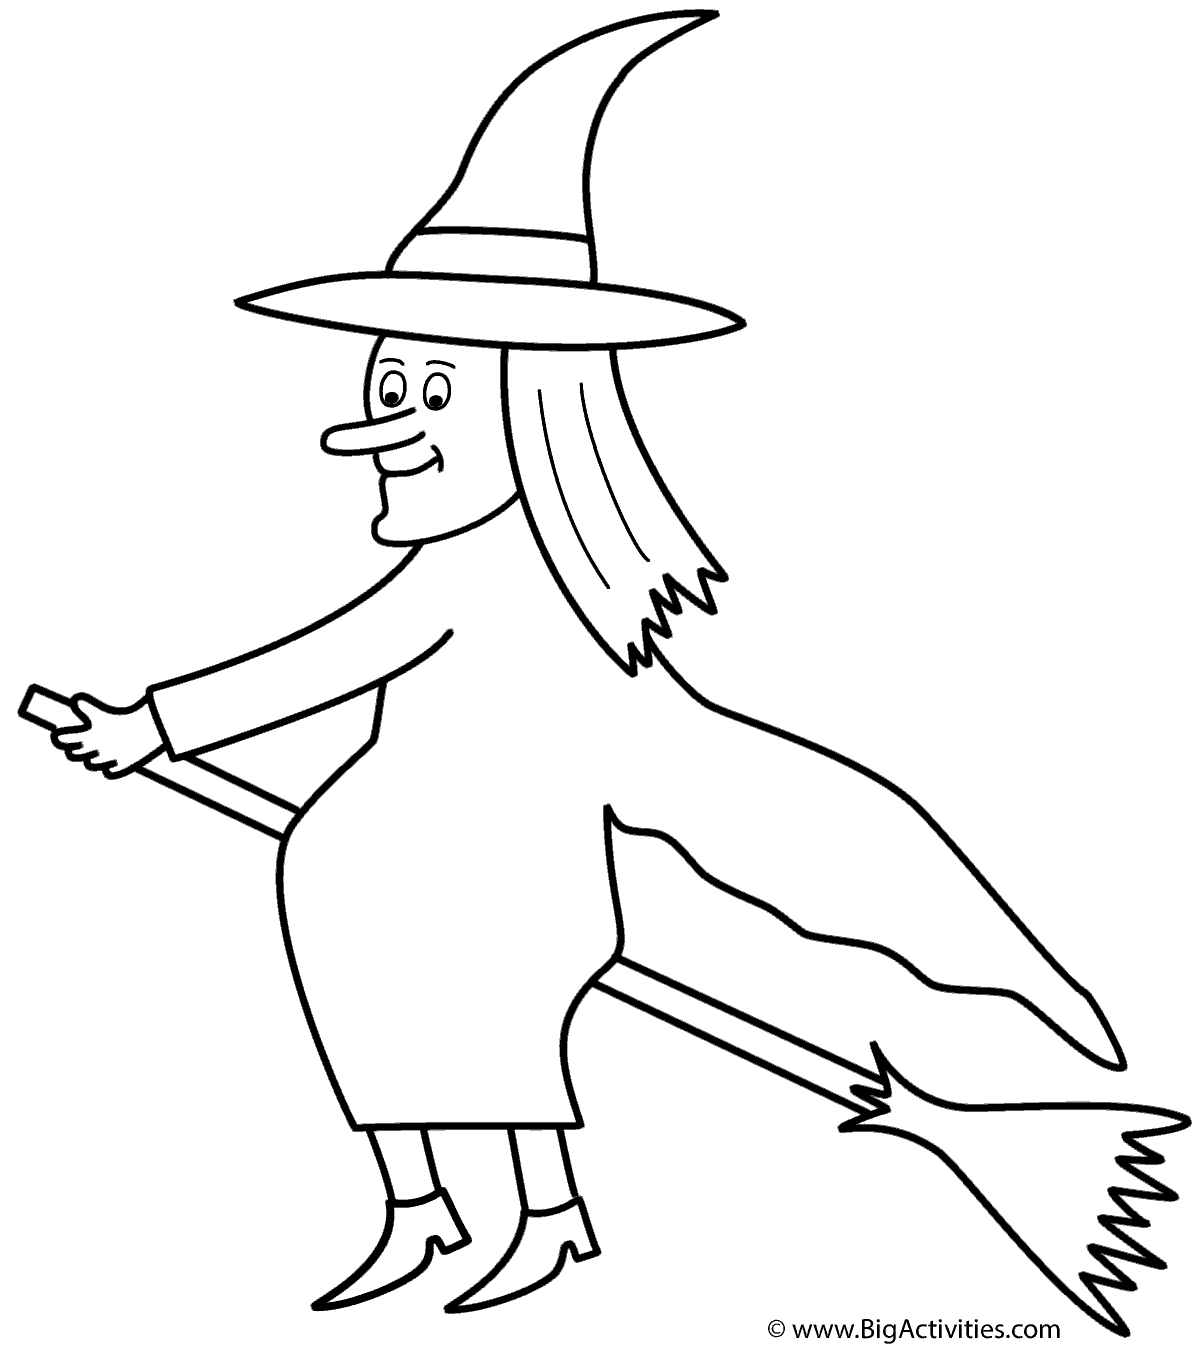 Witch on broom - Coloring Page (Halloween)